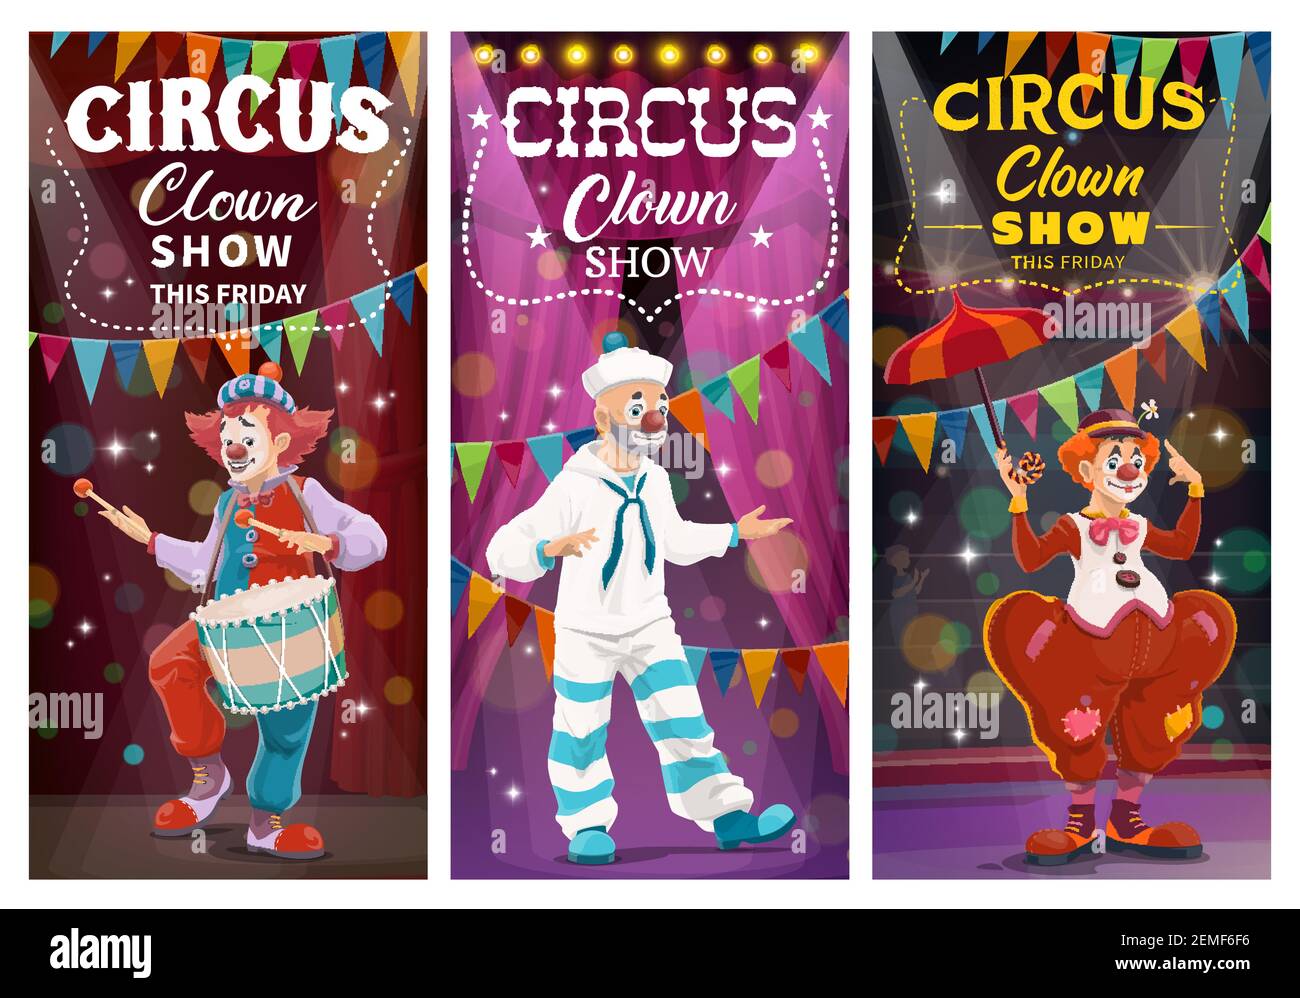 Circus clowns comedy show vector banners. Clowns with face makeup, wearing sailor suit and tramp costume, dancing and playing on drum, performing on l Stock Vector